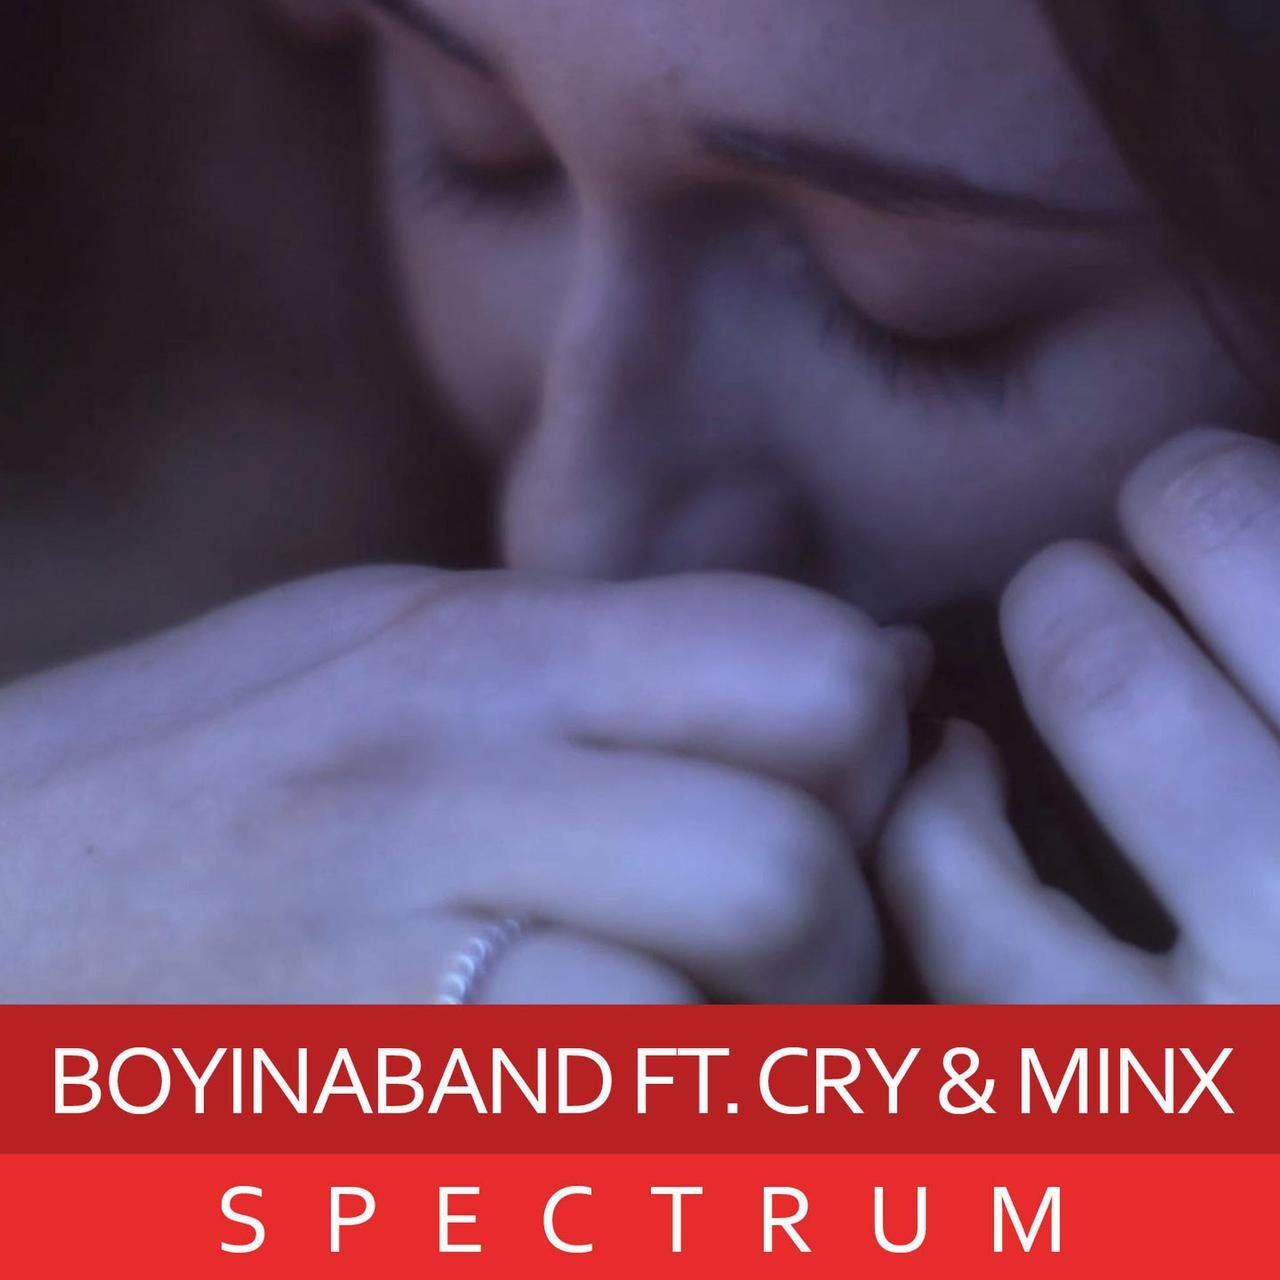 Boyinaband ft. featuring Cryaotic & MINX Spectrum cover artwork